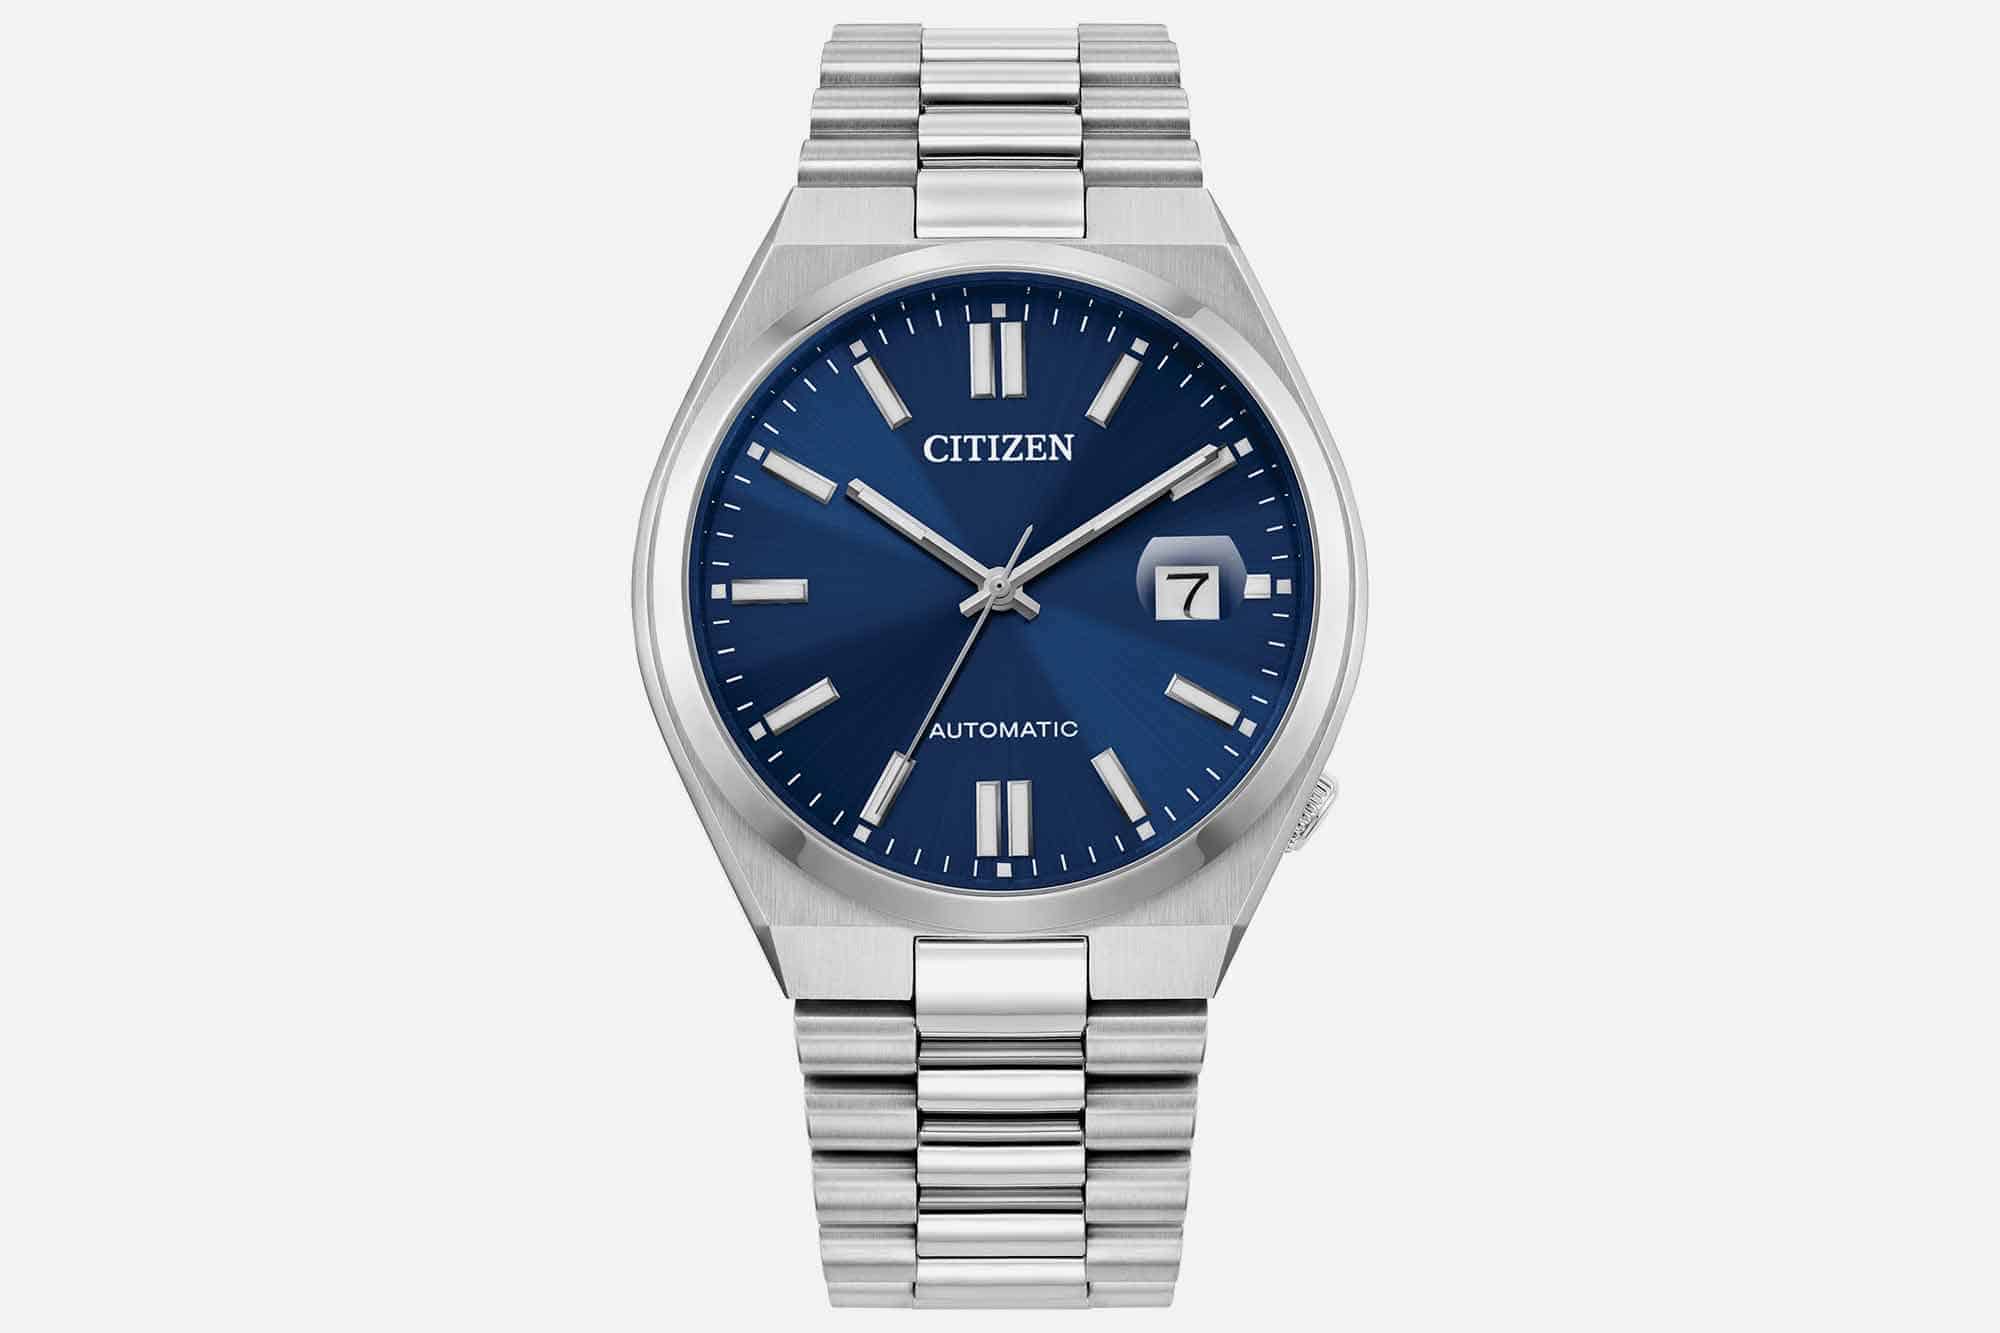 Citizen Enters the Affordable Integrated Bracelet Arena with the NJ015 Series “Tsuyosa”